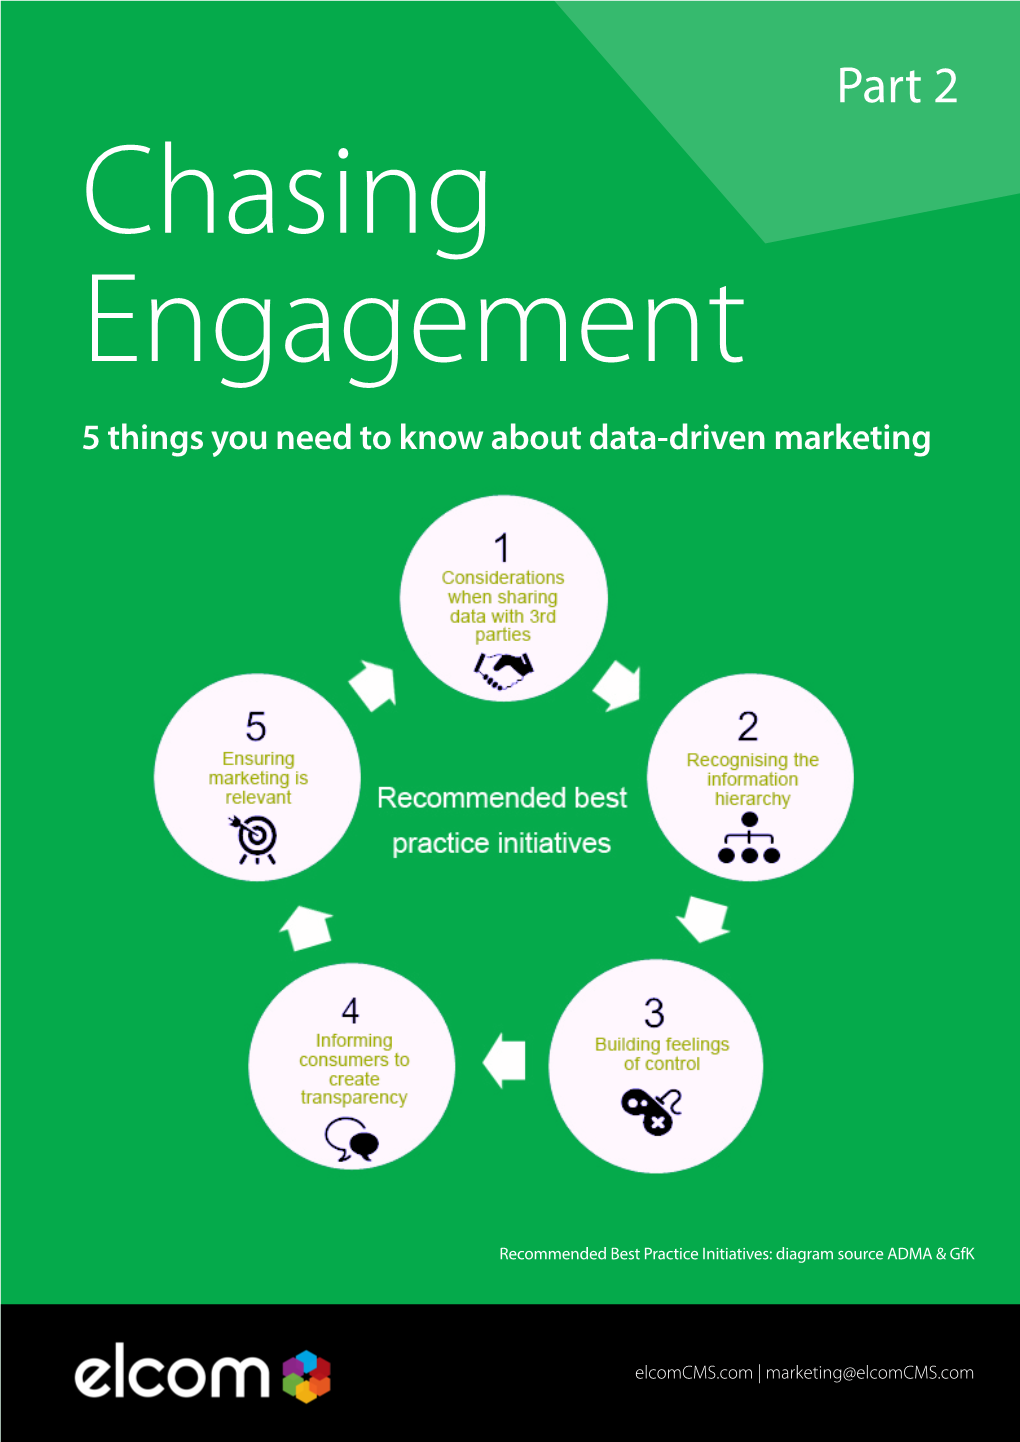 Part 2 Chasing Engagement 5 Things You Need to Know About Data-Driven Marketing